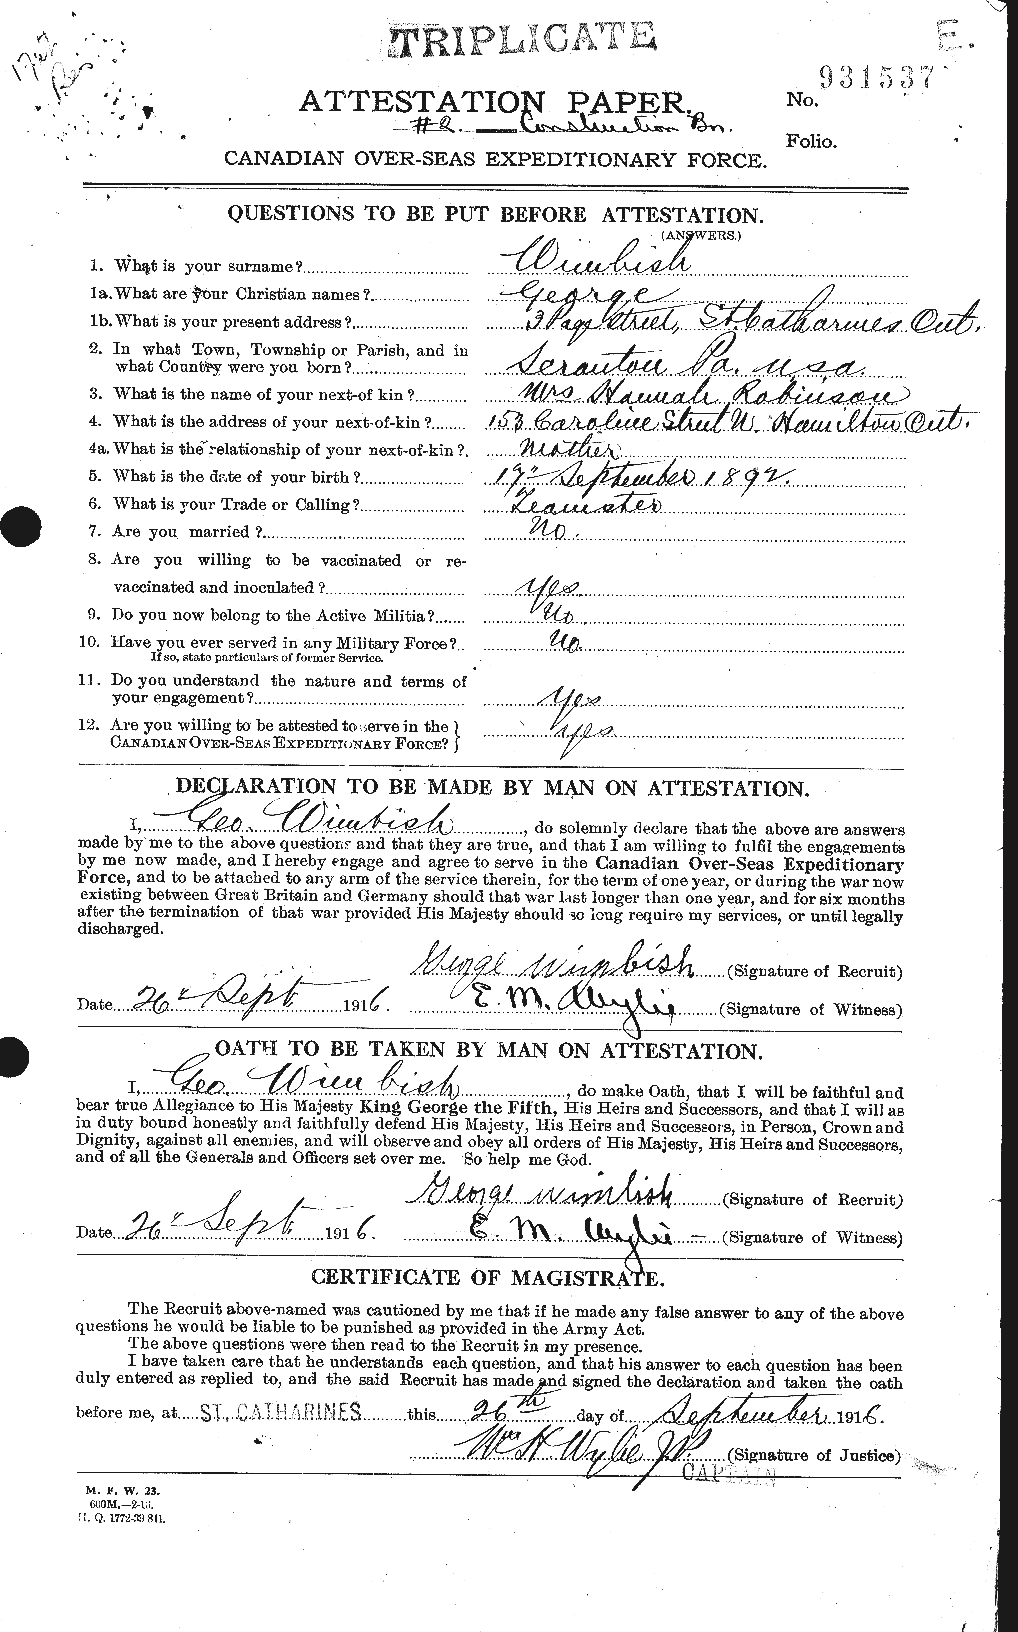 Personnel Records of the First World War - CEF 667176a